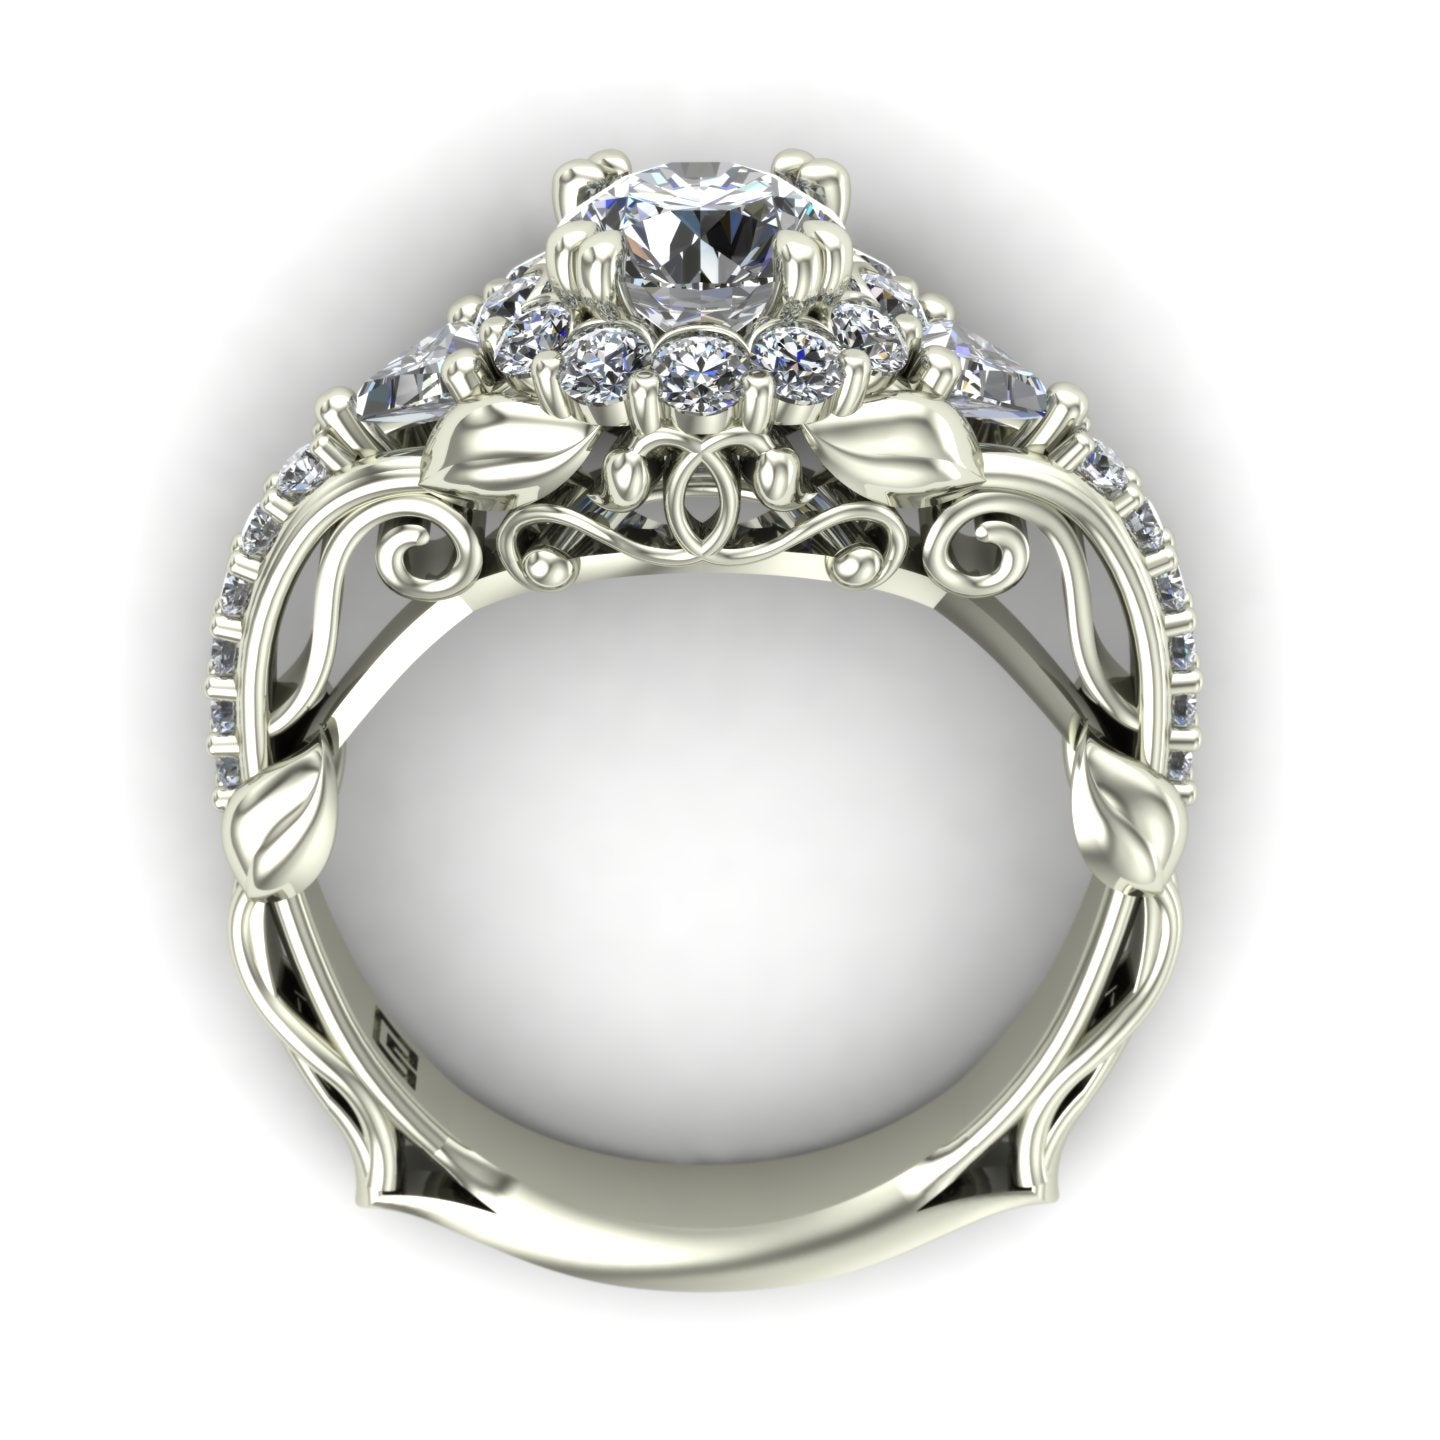 1ct diamond halo engagement ring with trillions and vines in 14k white gold - Charles Babb Designs - through finger view